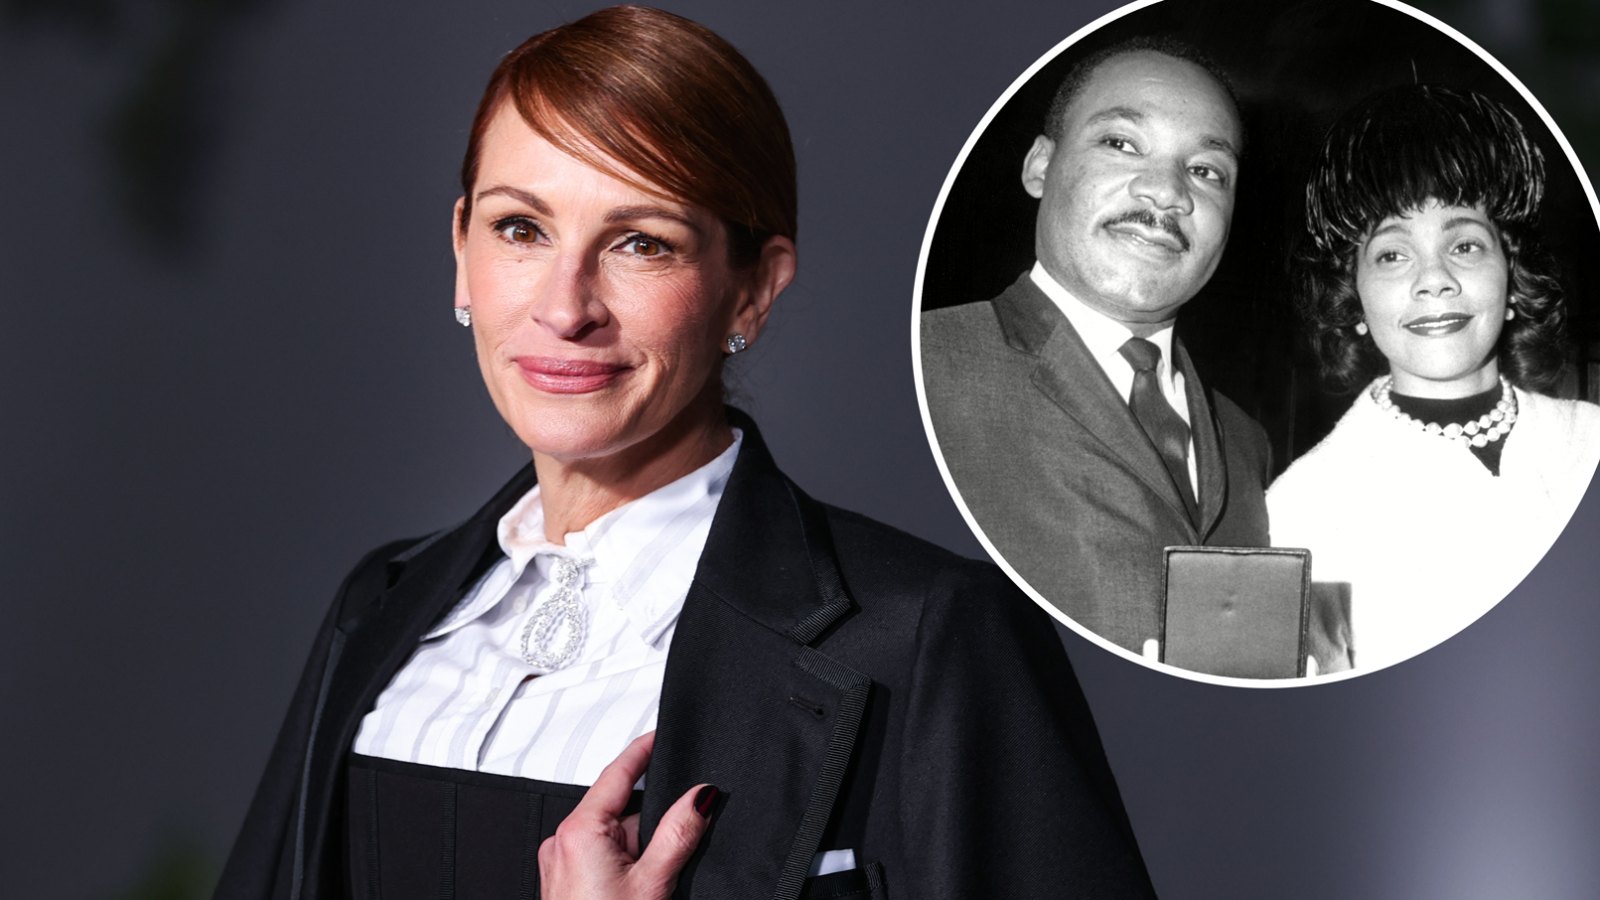 Julia Roberts Reveals Martin Luther King Jr. and Wife Coretta Scott King Paid the Hospital Bill for Her Birth